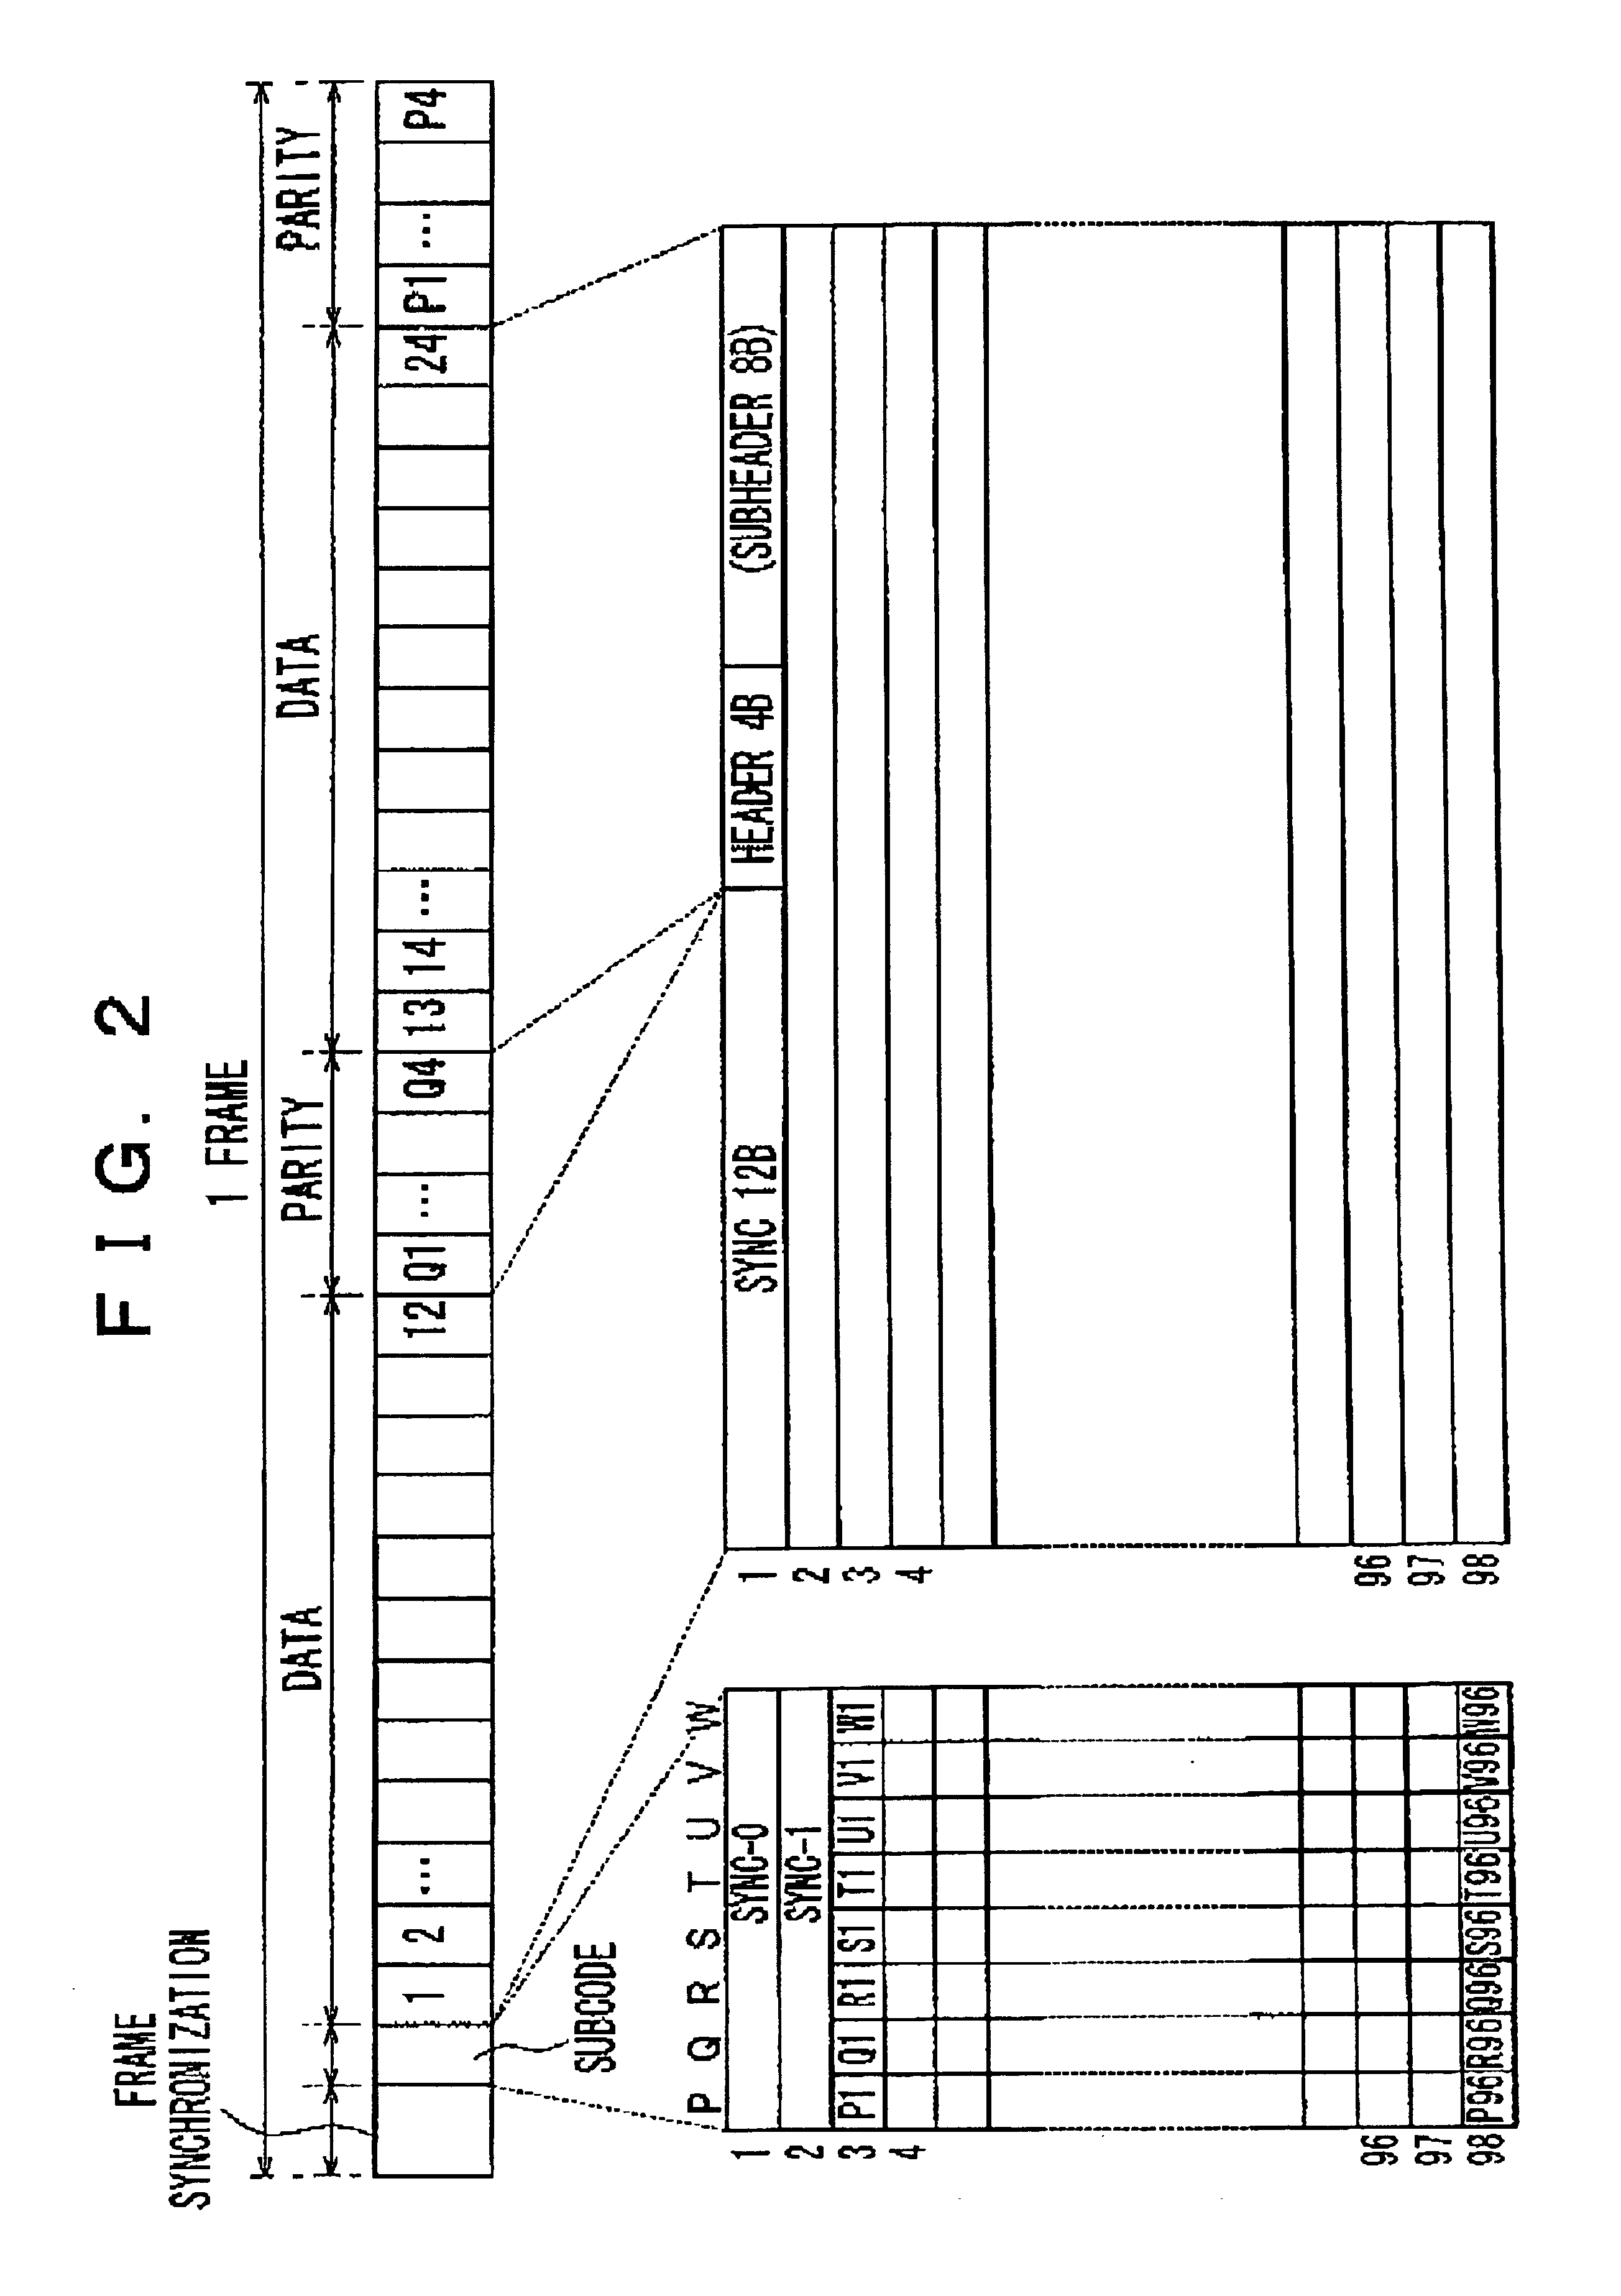 Optically recorded data discrimination apparatus and associated methodology